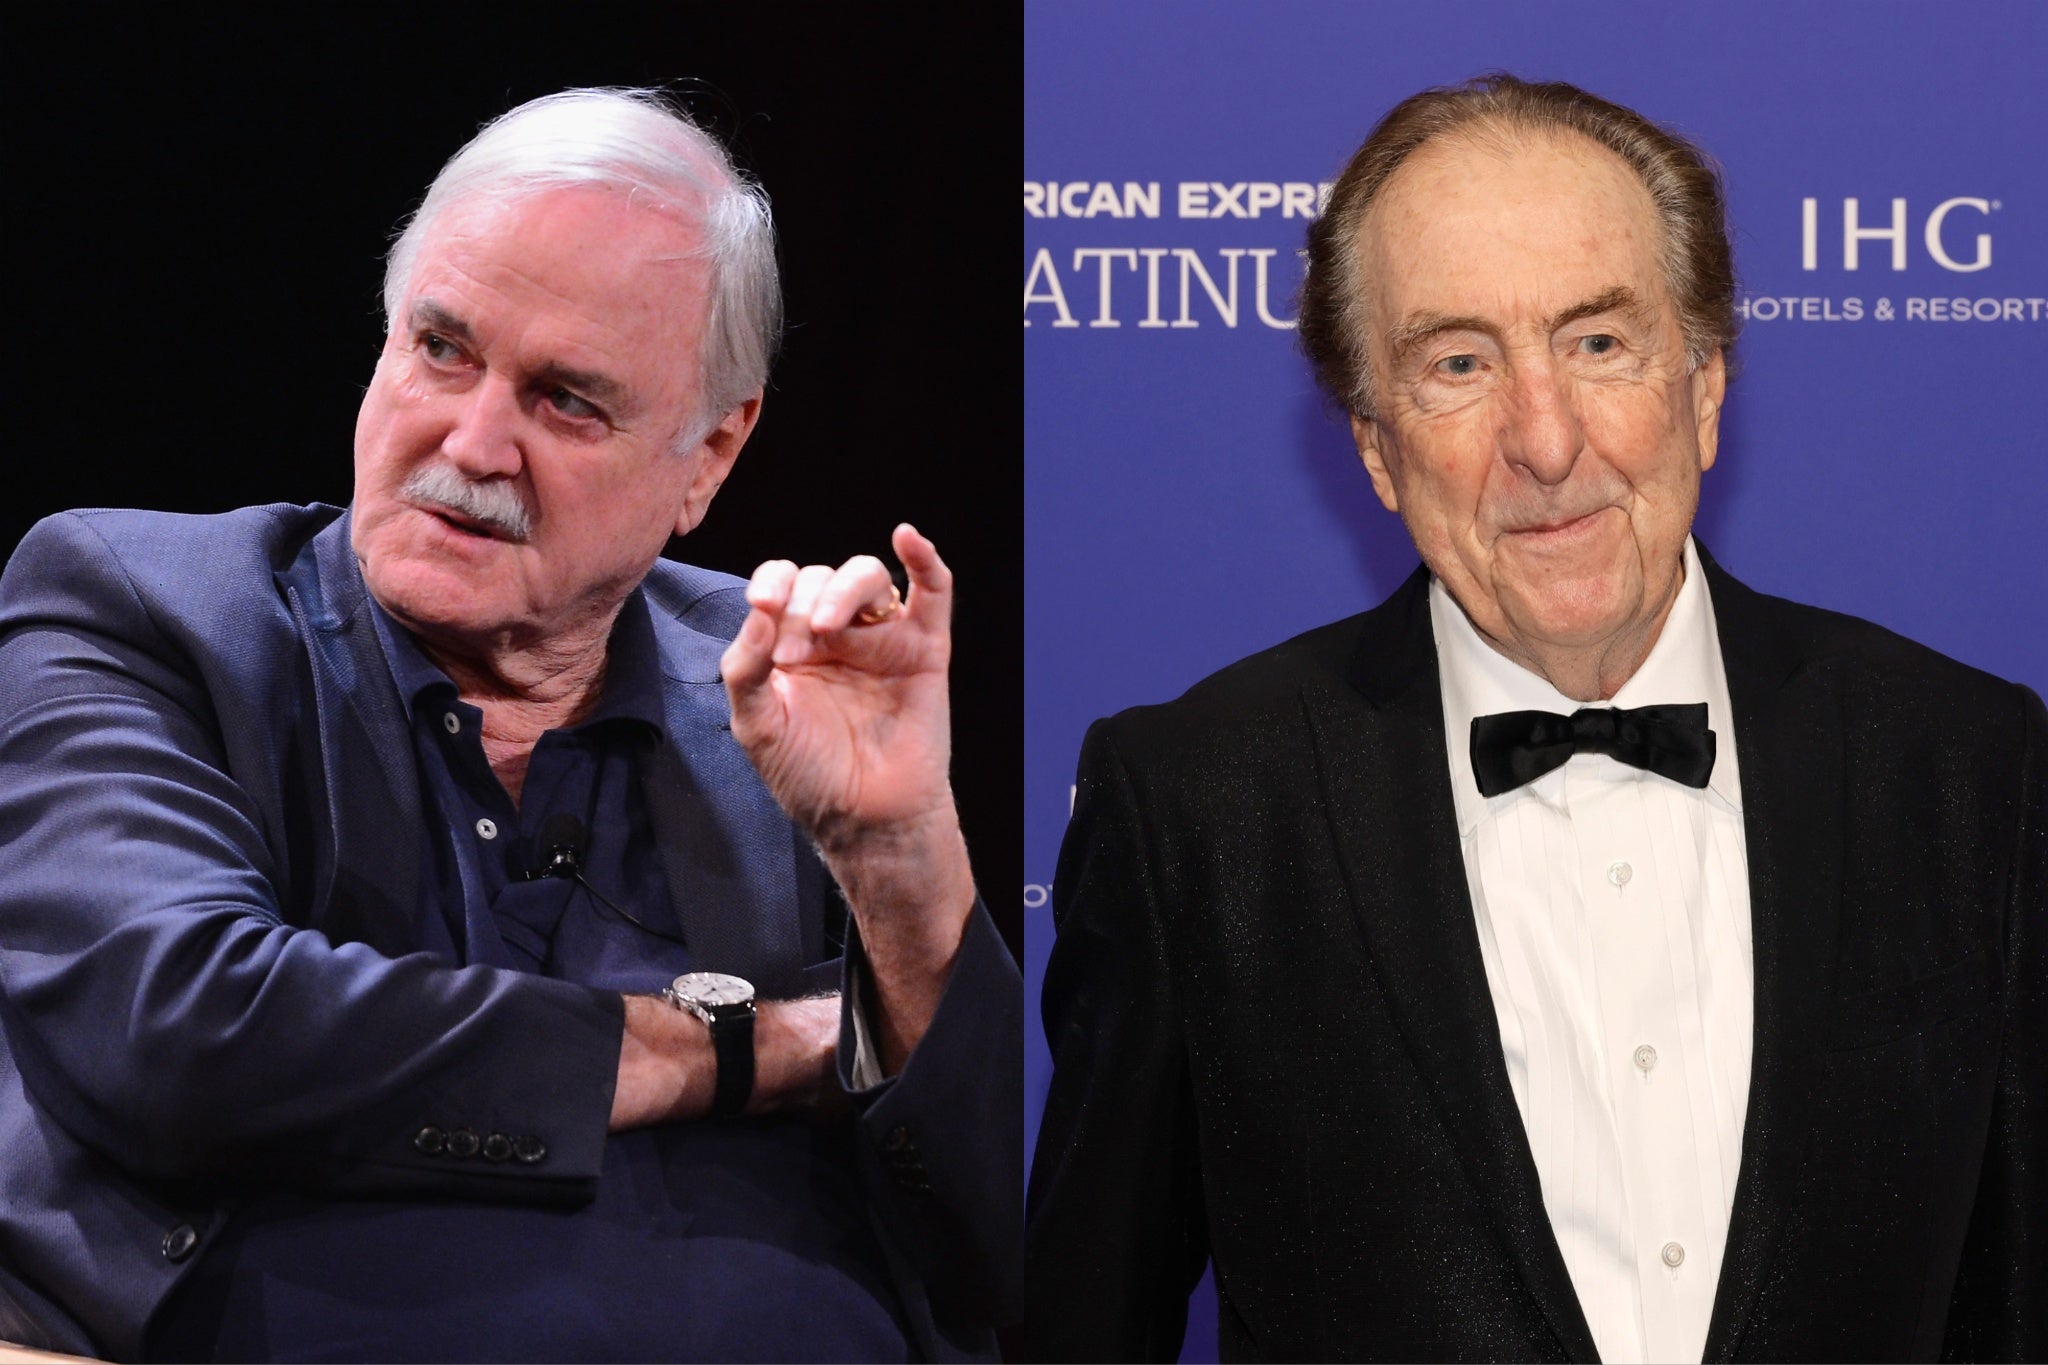 John Cleese and Eric Idle were involved in an online spat earlier this year